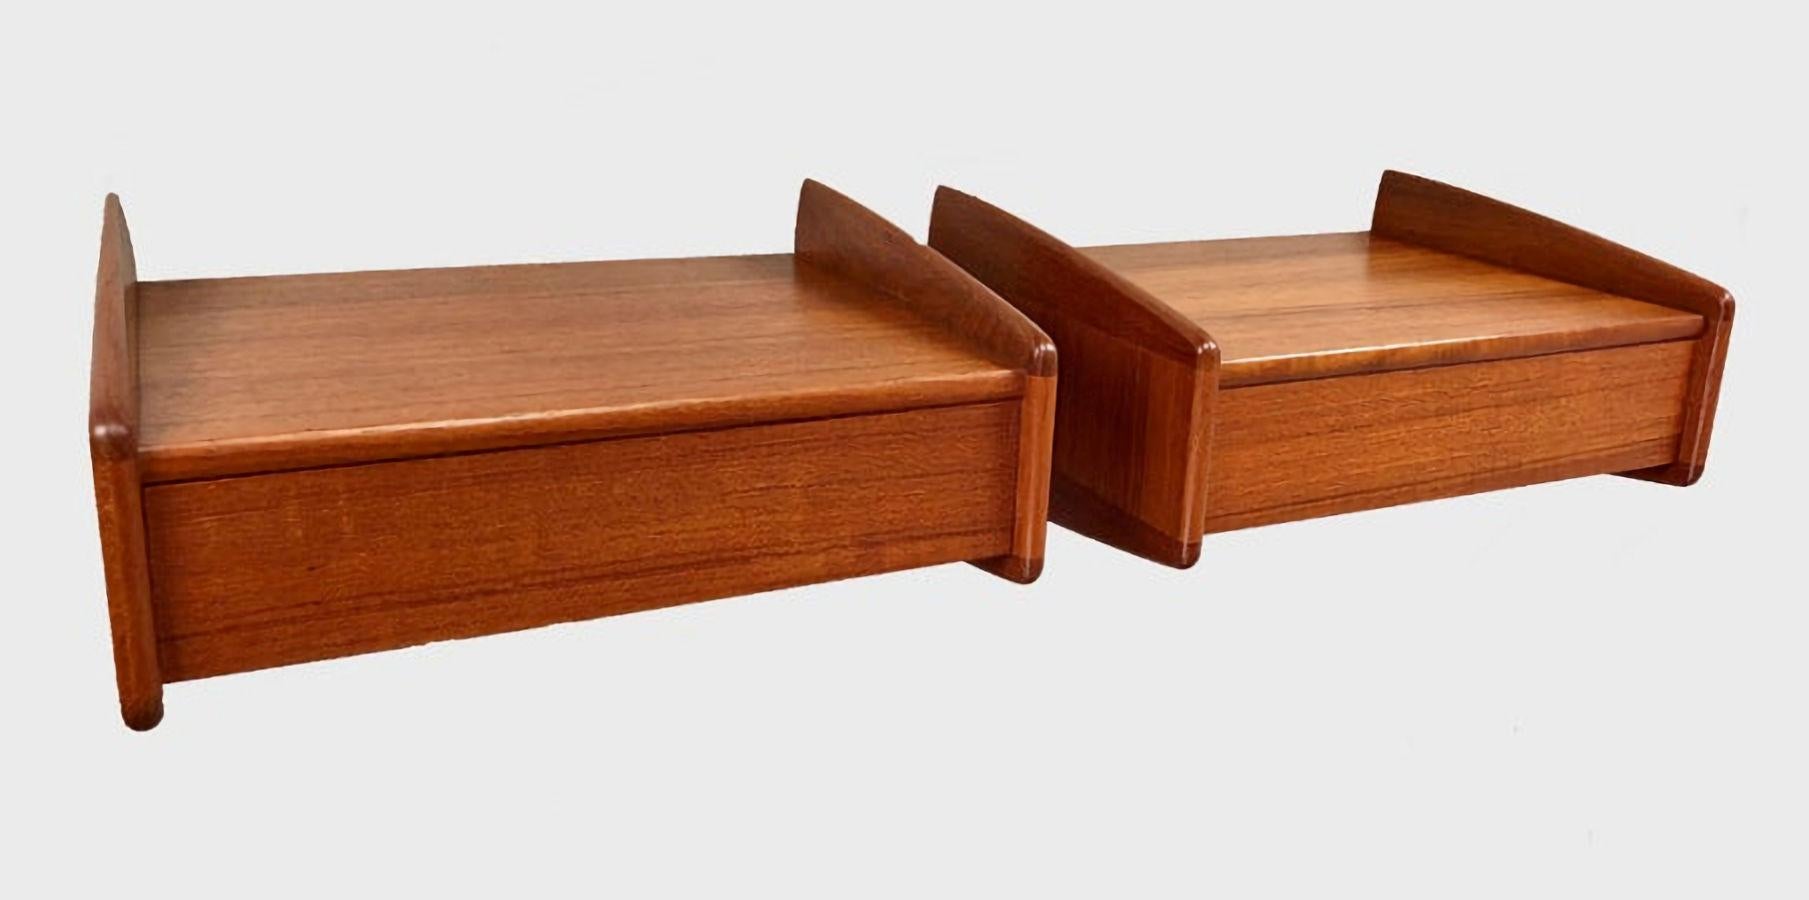 1960s set of two fully restored Danish Melvin Mikkelsen floating nightstands in teak

The well designed nightstands or shelves in teak, feature the elegant soft organic shapes and supreme craftmanship that  characterized Melvin Mikkelsens